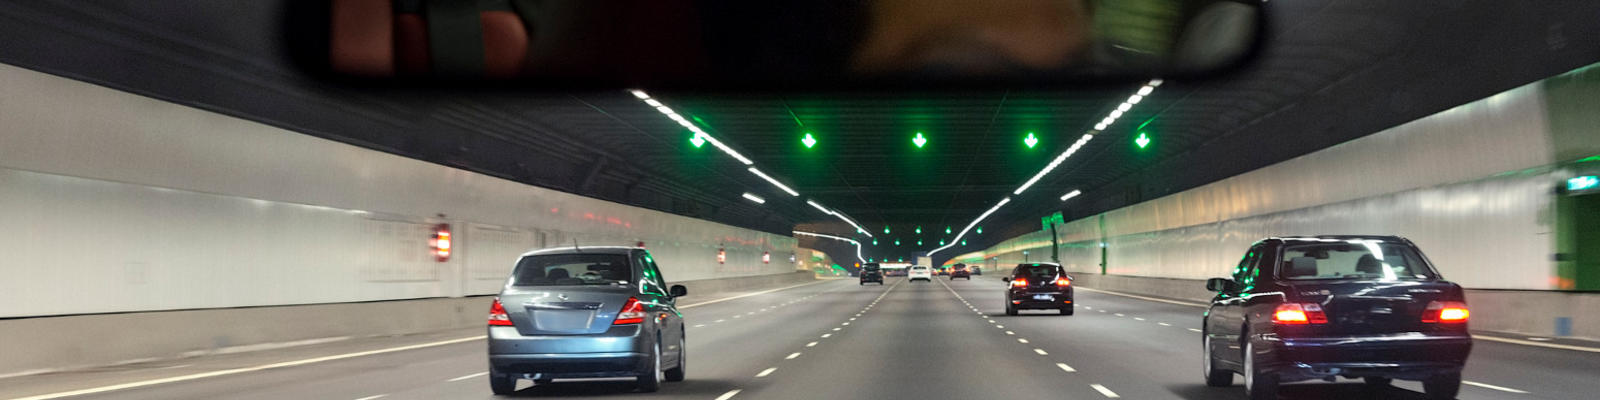 A view of cars driving through a tunnel from the point of view of a driver of the car at the rear